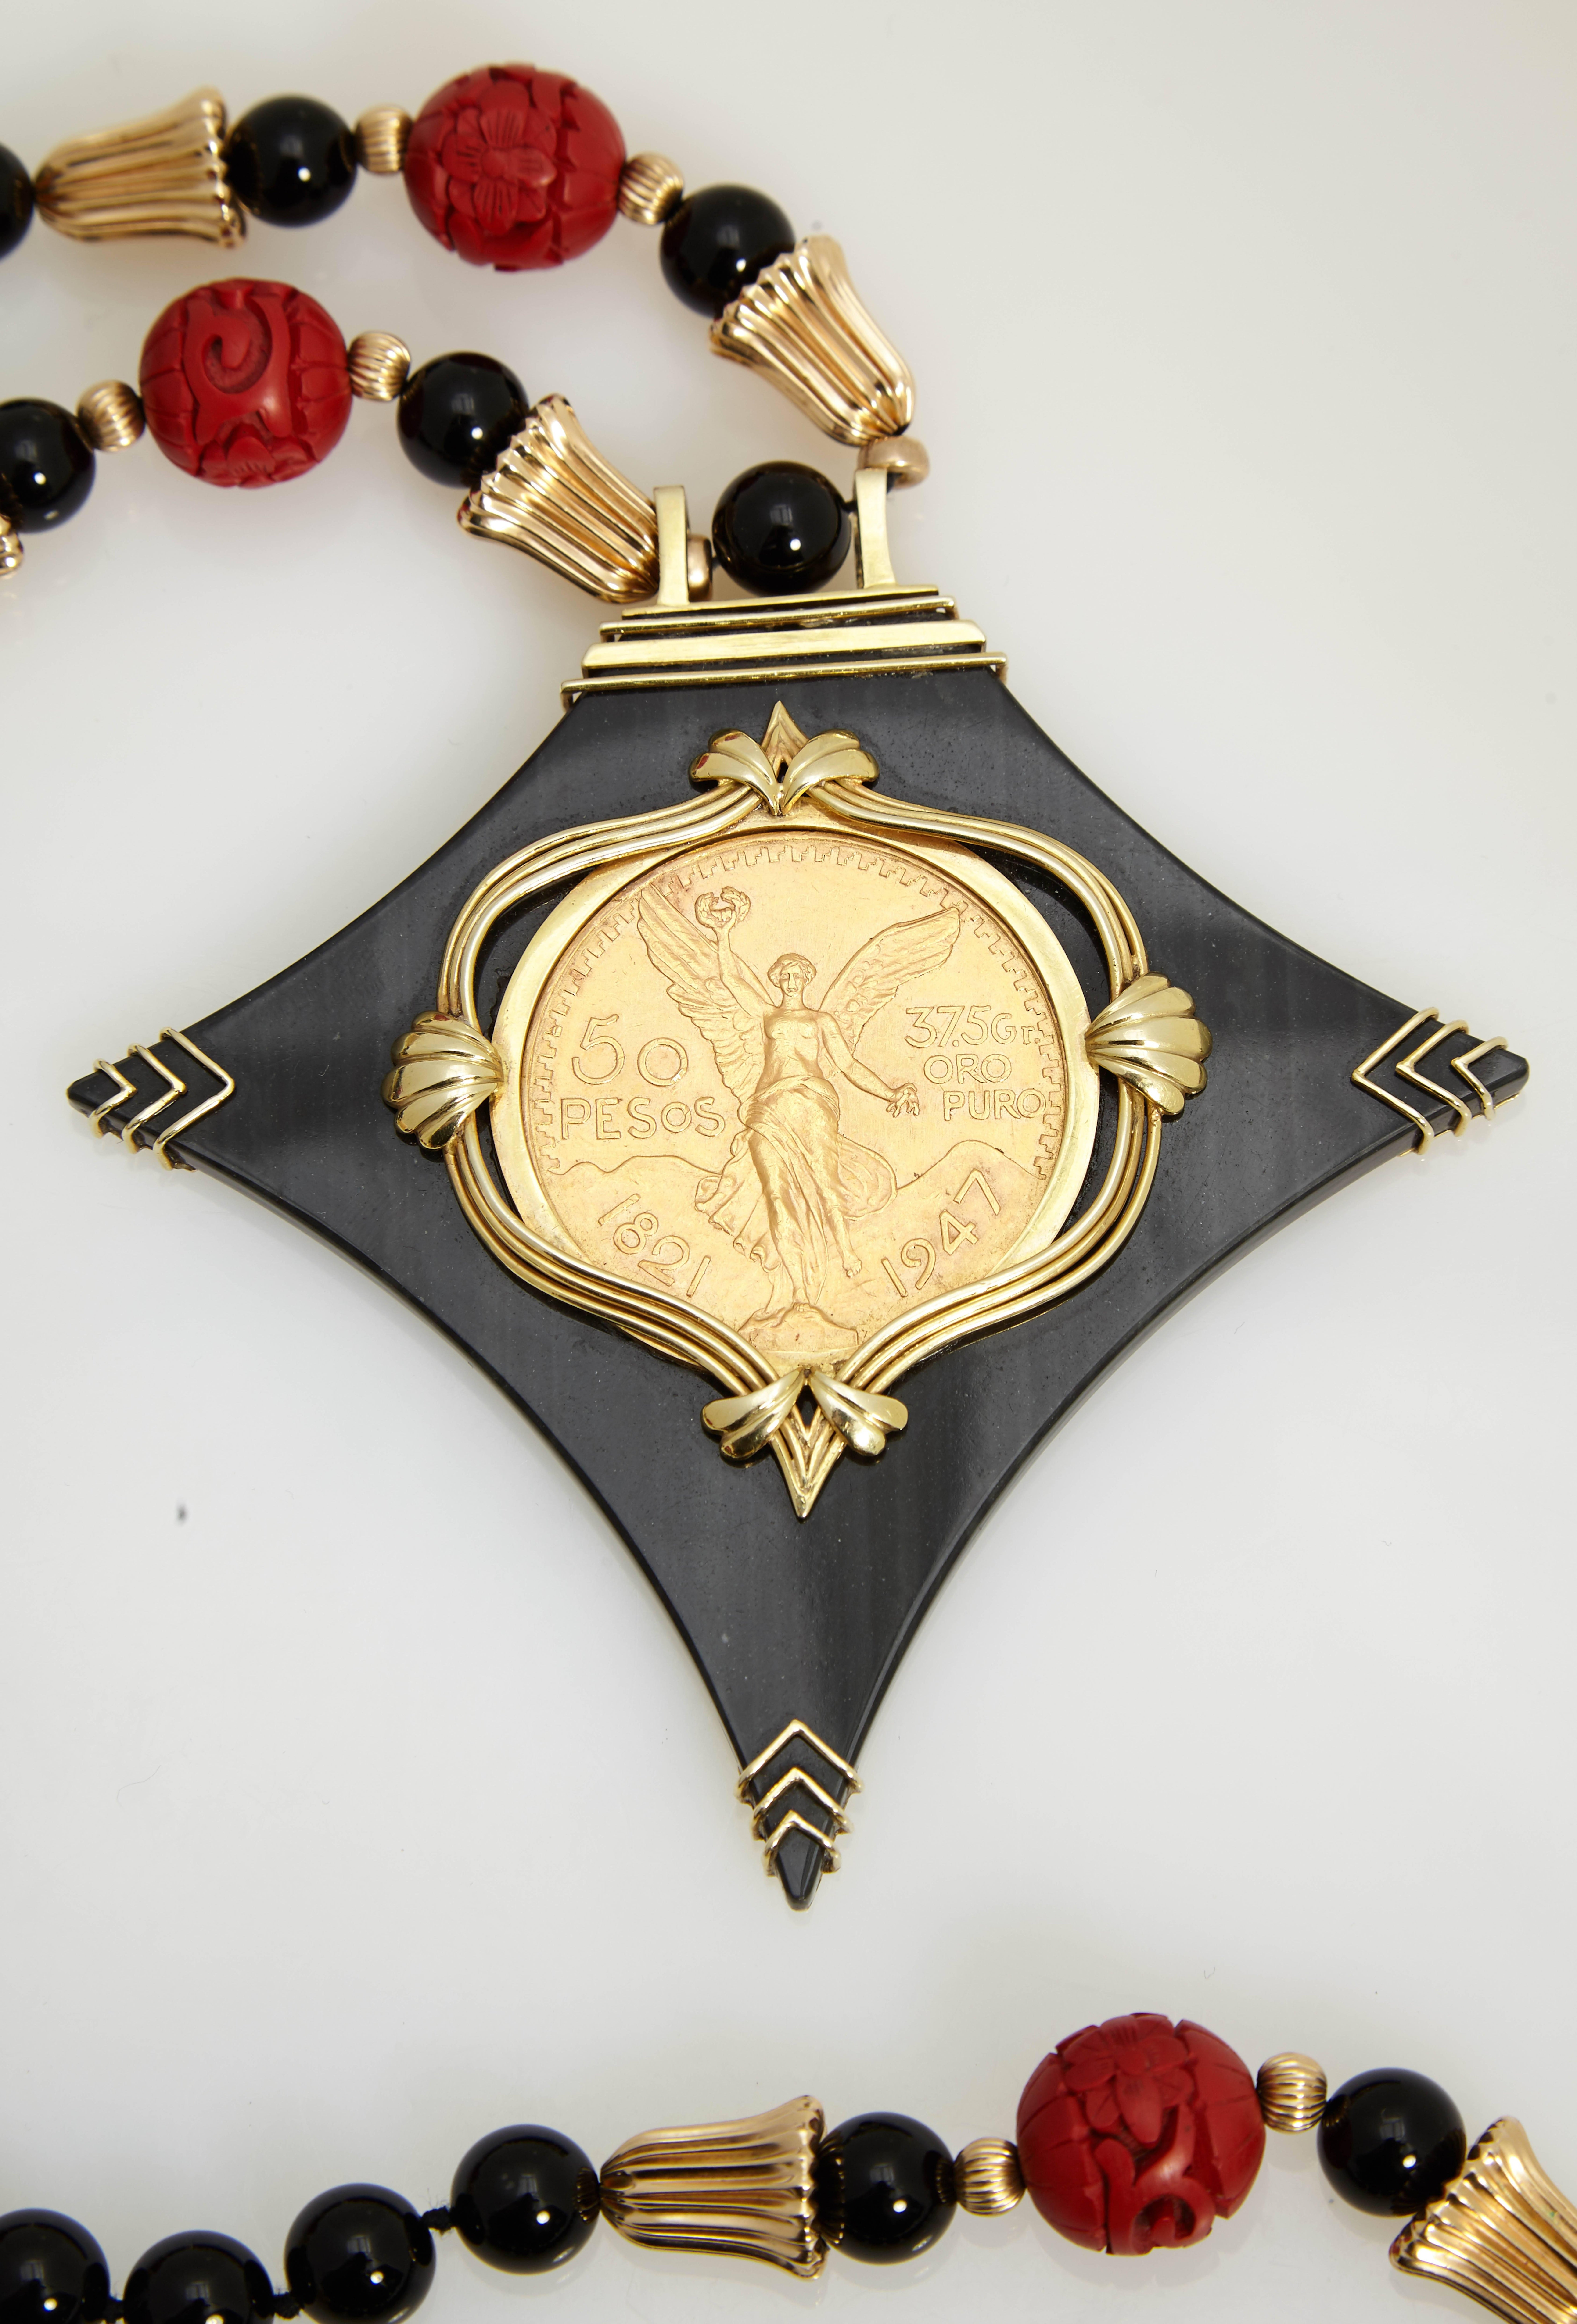 An Extravagant 18kt Yellow Gold, Onyx and Laquer Bead Necklace featuring a Pendant with a Mexican 50 Peso Gold Coin (dated 1821 - 1947). Circa 1975 